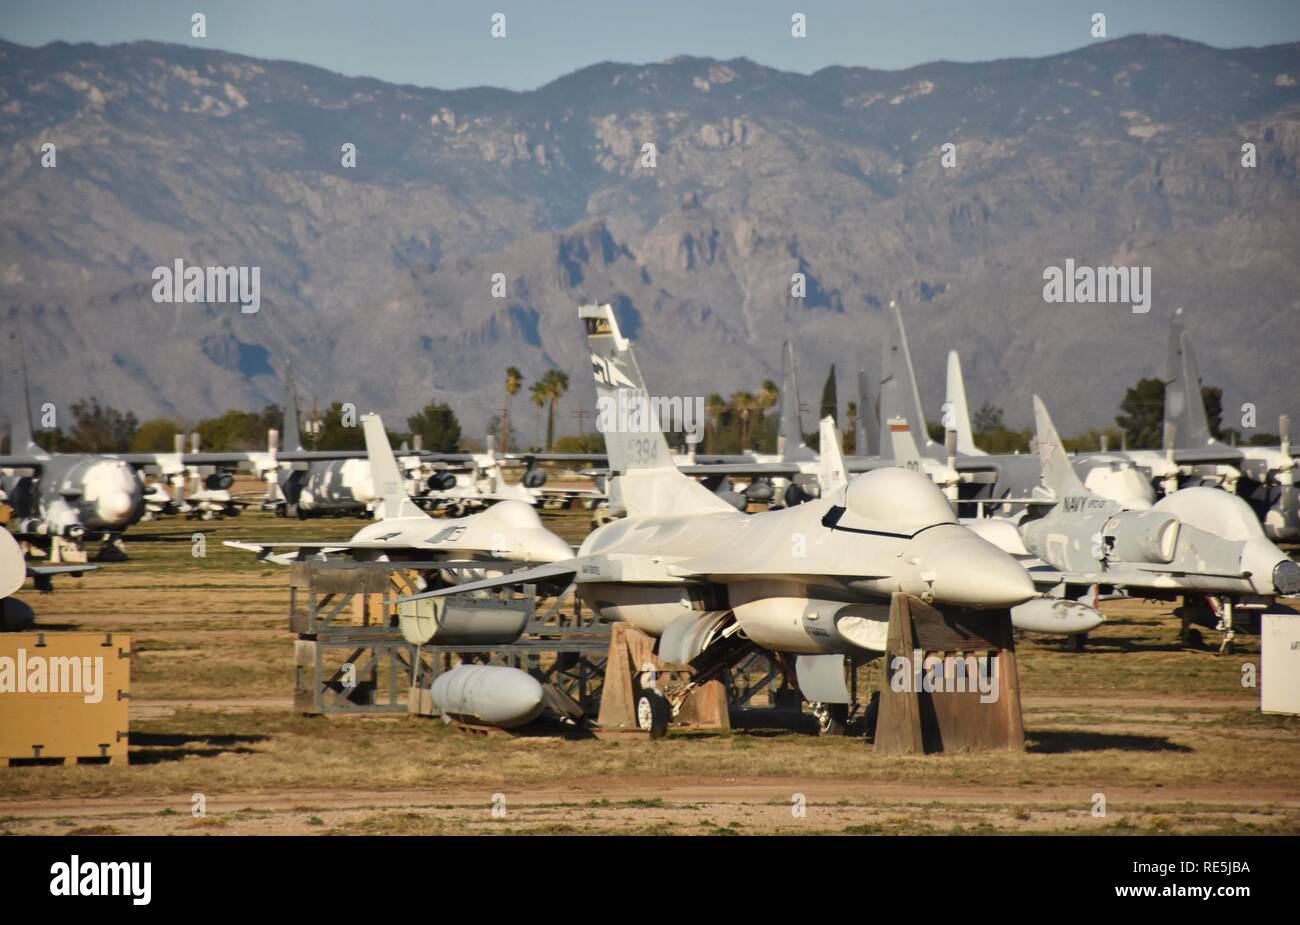 A fleet of fighter jets in long-term storage at the Air Force Boneyard at Davis-Monthan, operated by the AMARG Stock Photo